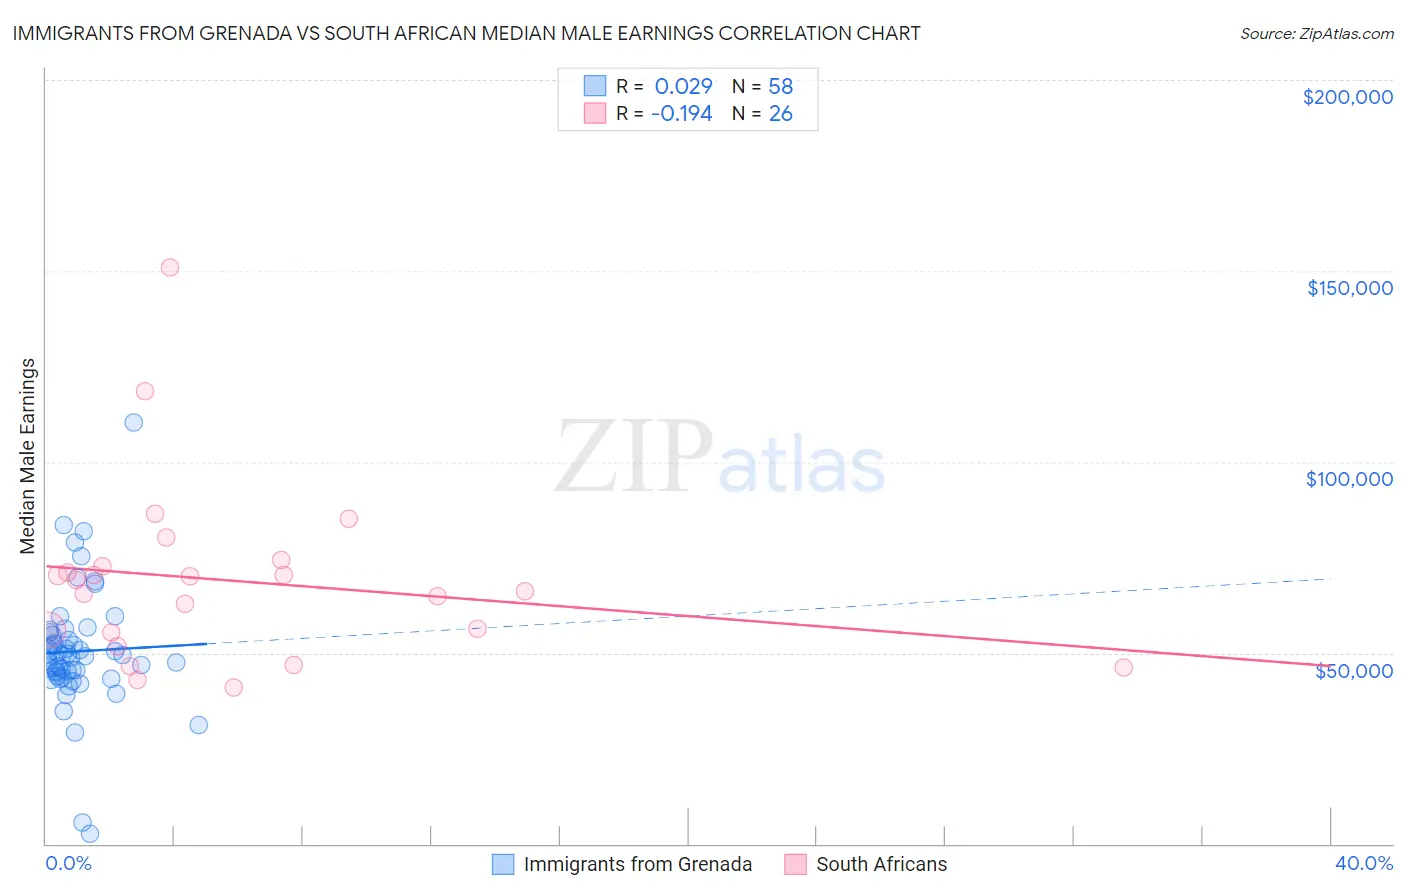 Immigrants from Grenada vs South African Median Male Earnings